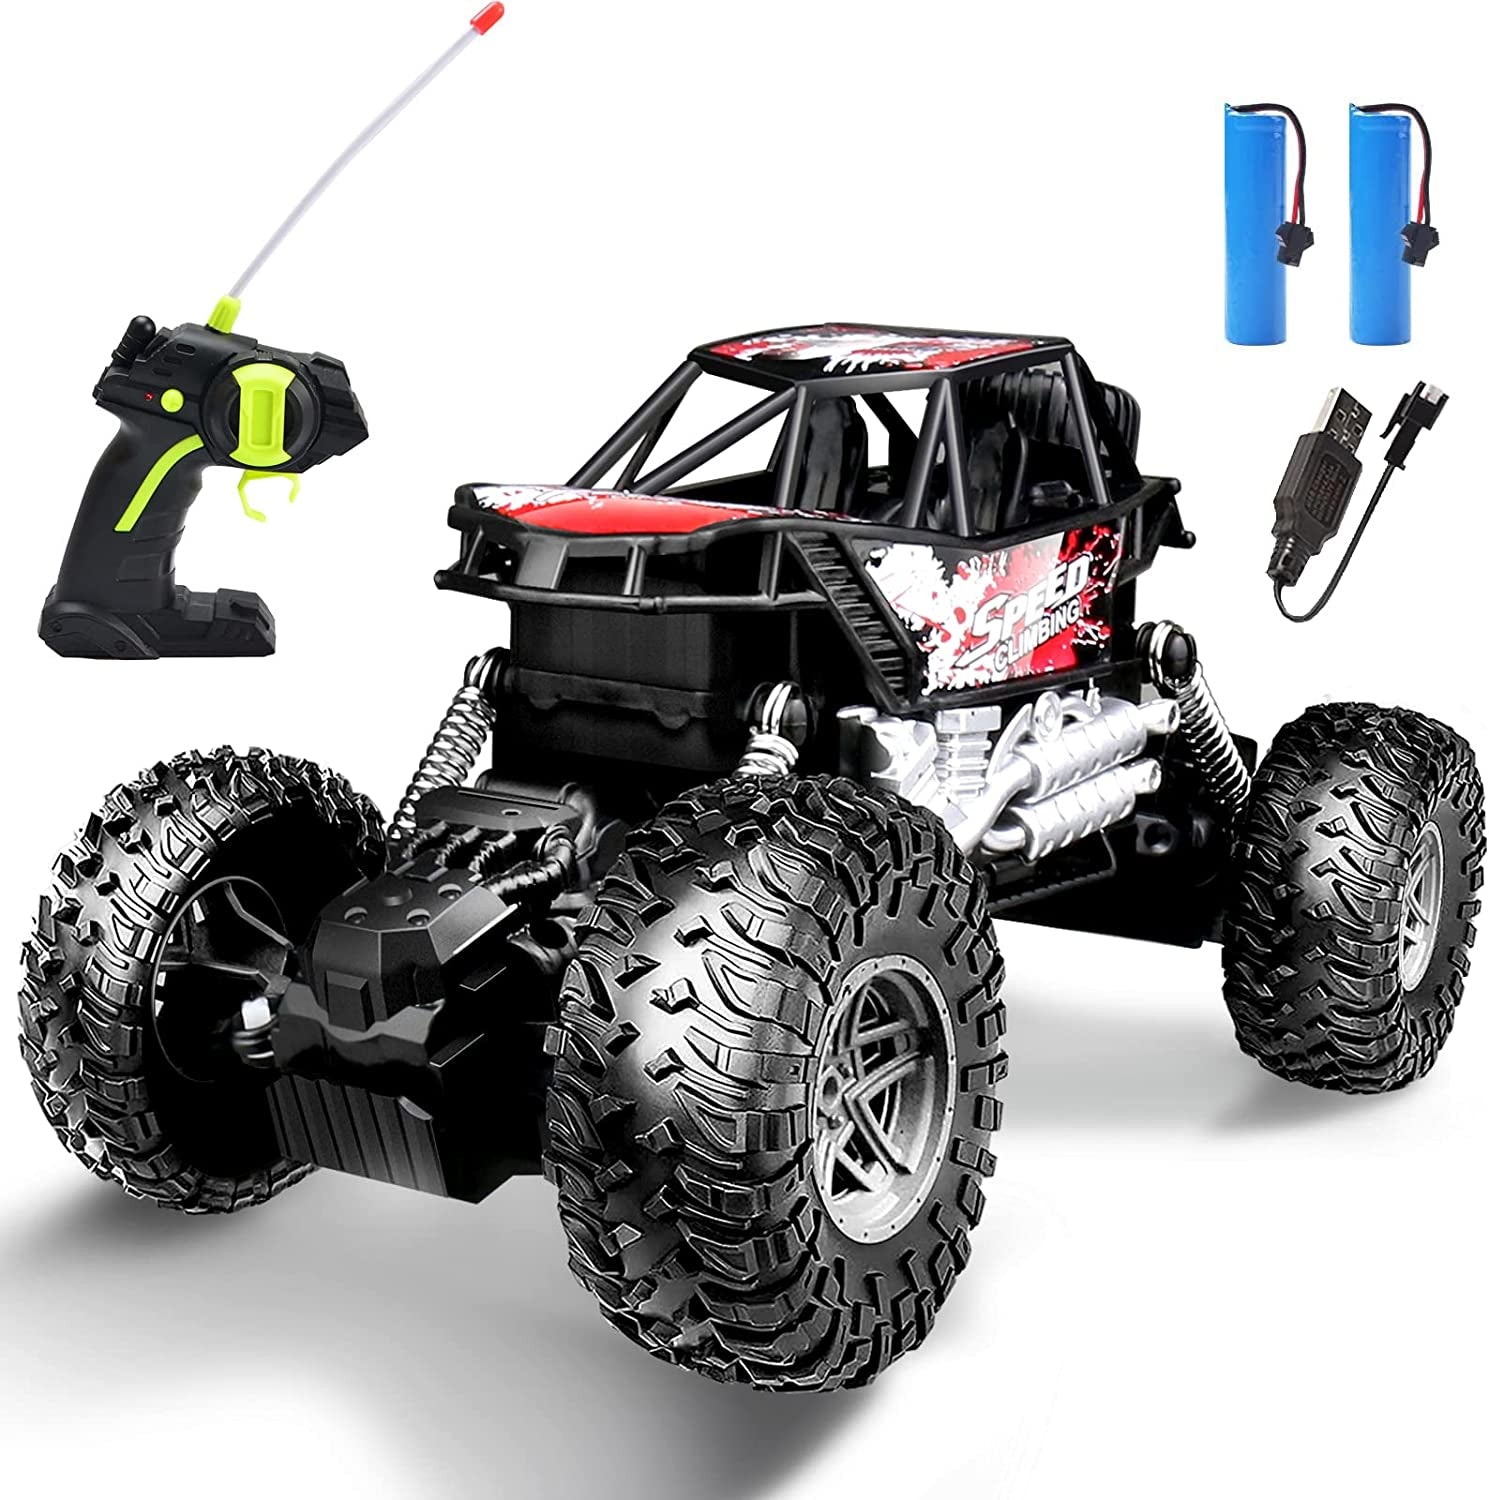 JYFKZK 1:18 Scale RC Monster Vehicle Truck Crawler, All Terrains 4WD High Speed Electric Vehicle with Remote Control, off Road Truck with Two Rechargeable Batteries for Boys Kids and Adults Red (Red)